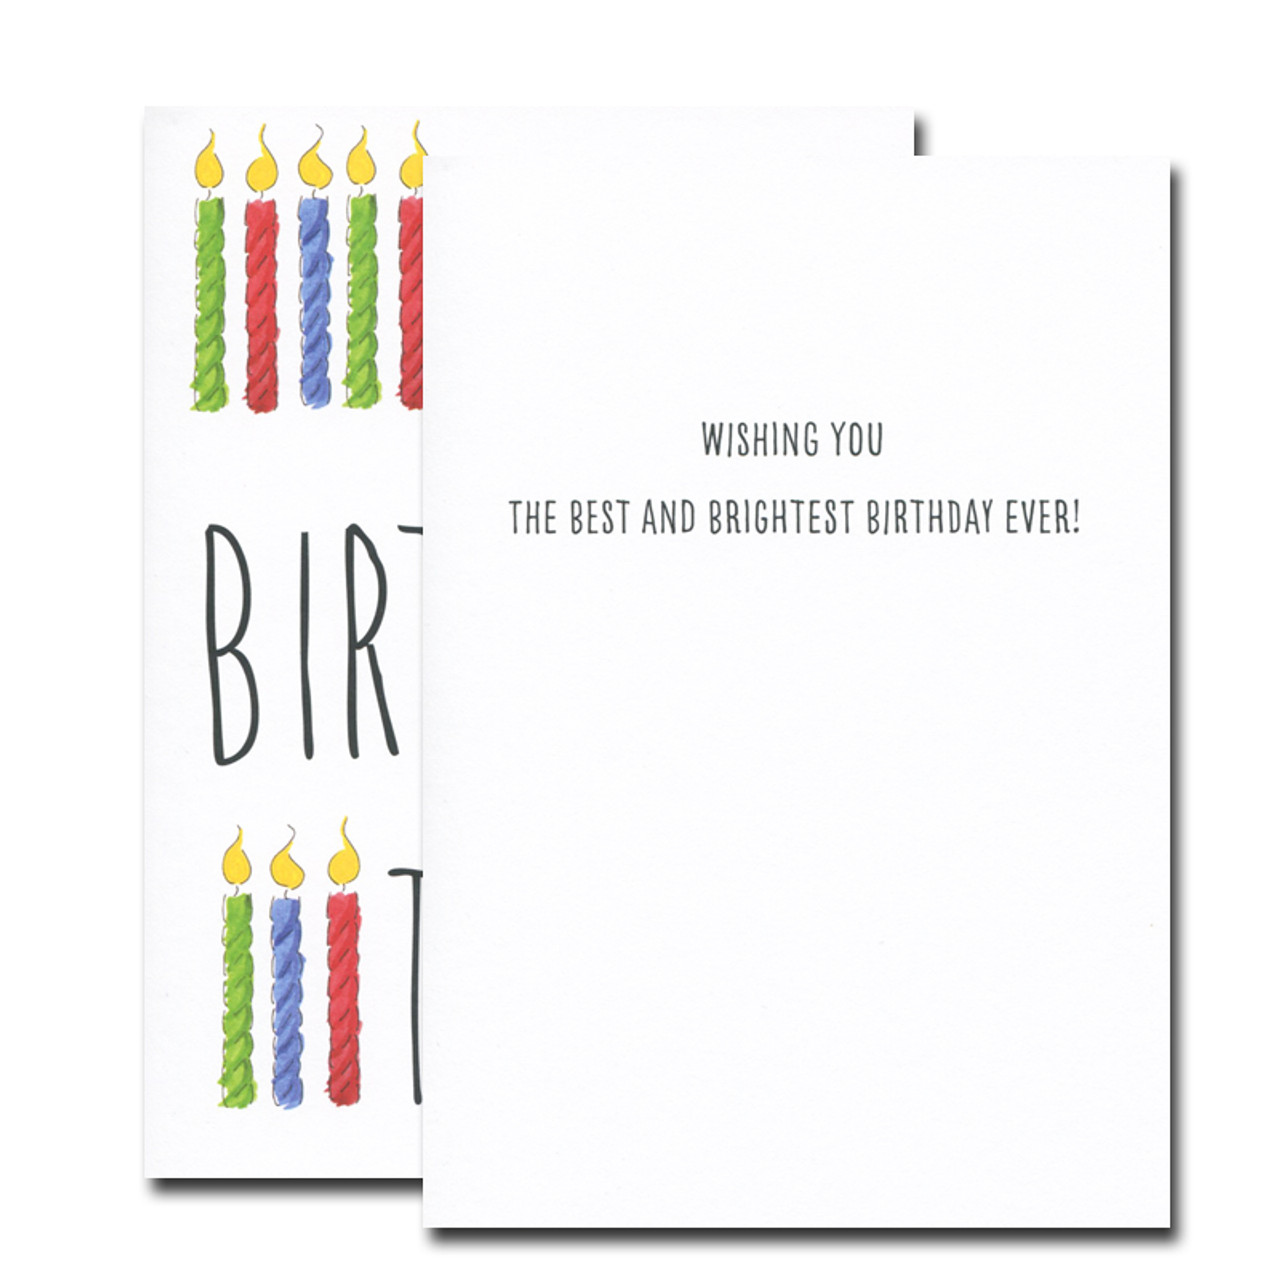 Boxed Birthday Card - Best and Brightest inside reads: Wishing you the best and brightest birthday ever